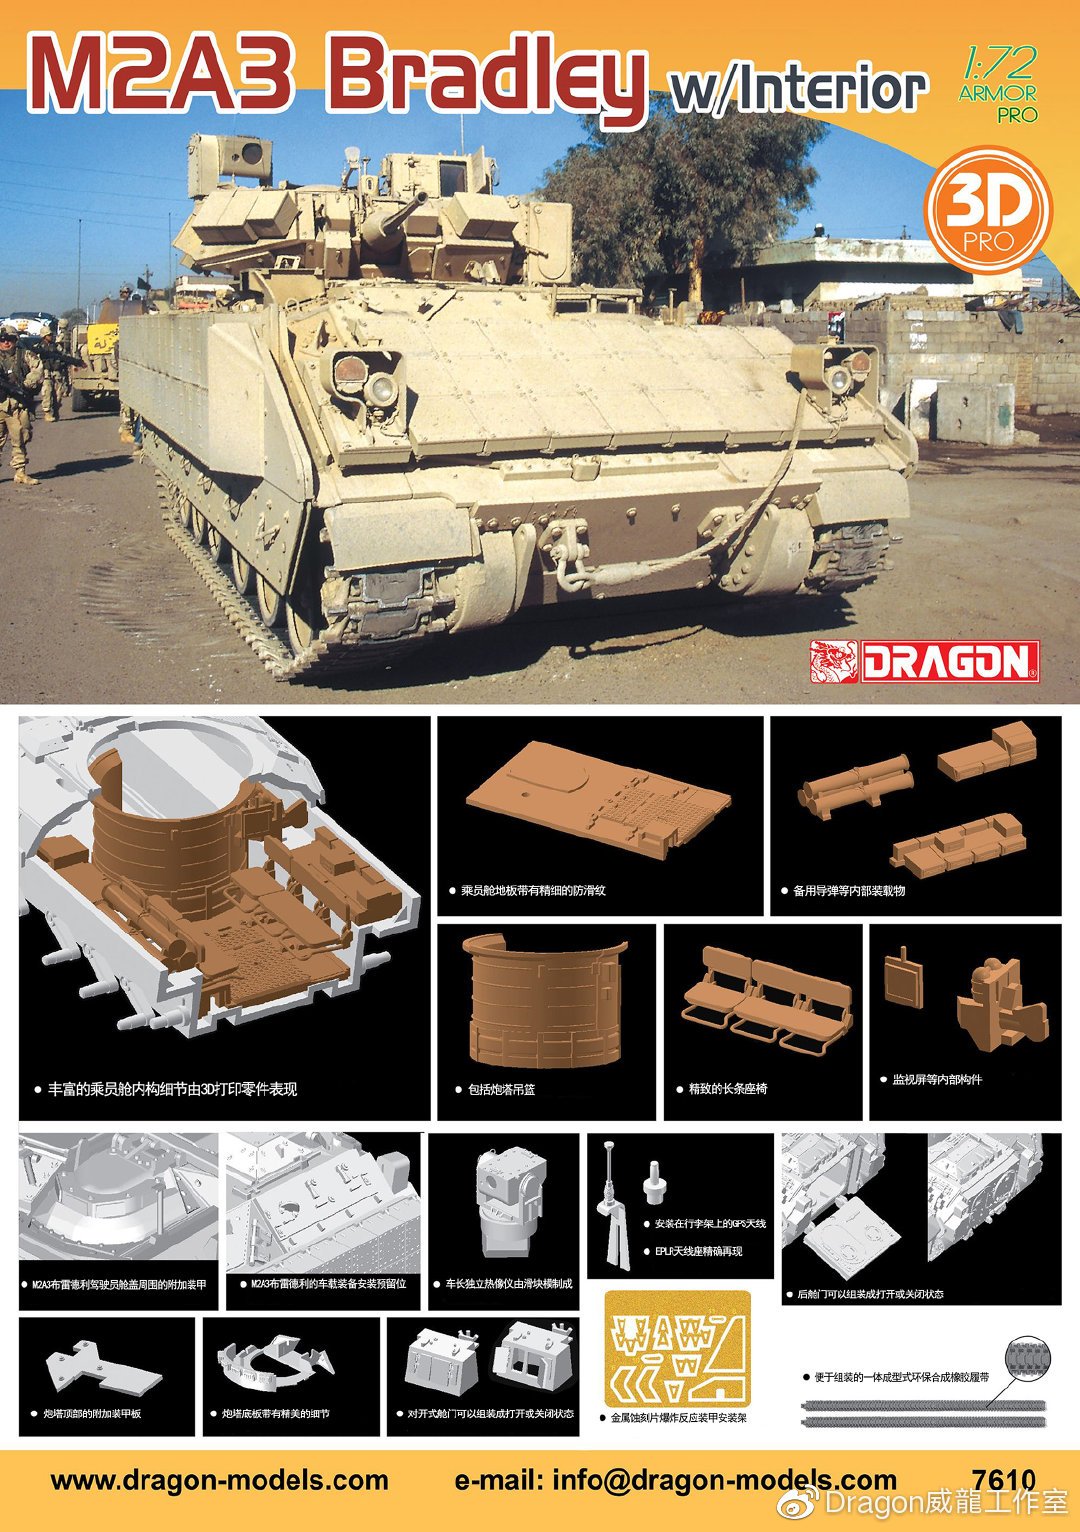  

The NO.7623 1/72 M2A3 Bradley Infantry Fighting Vehicle is included in the 1/72 scale M2 Bradley series kits that have been reprinted one after another. This kit not only provides a wealth of board content, but also restores unique features such as the commander's independent thermal camera, additional armor around the cockpit, GPS antenna and EPLR antenna. On the basis of NO.7623, we have added rich details of the interior structure of the crew compartment, including the floor of the crew compartment, the turret basket, the seats and the on-board storage. These internal components are all made of 3D printing. After the hatch is made open, the layout of the cabin can be seen from the rear of the car body.